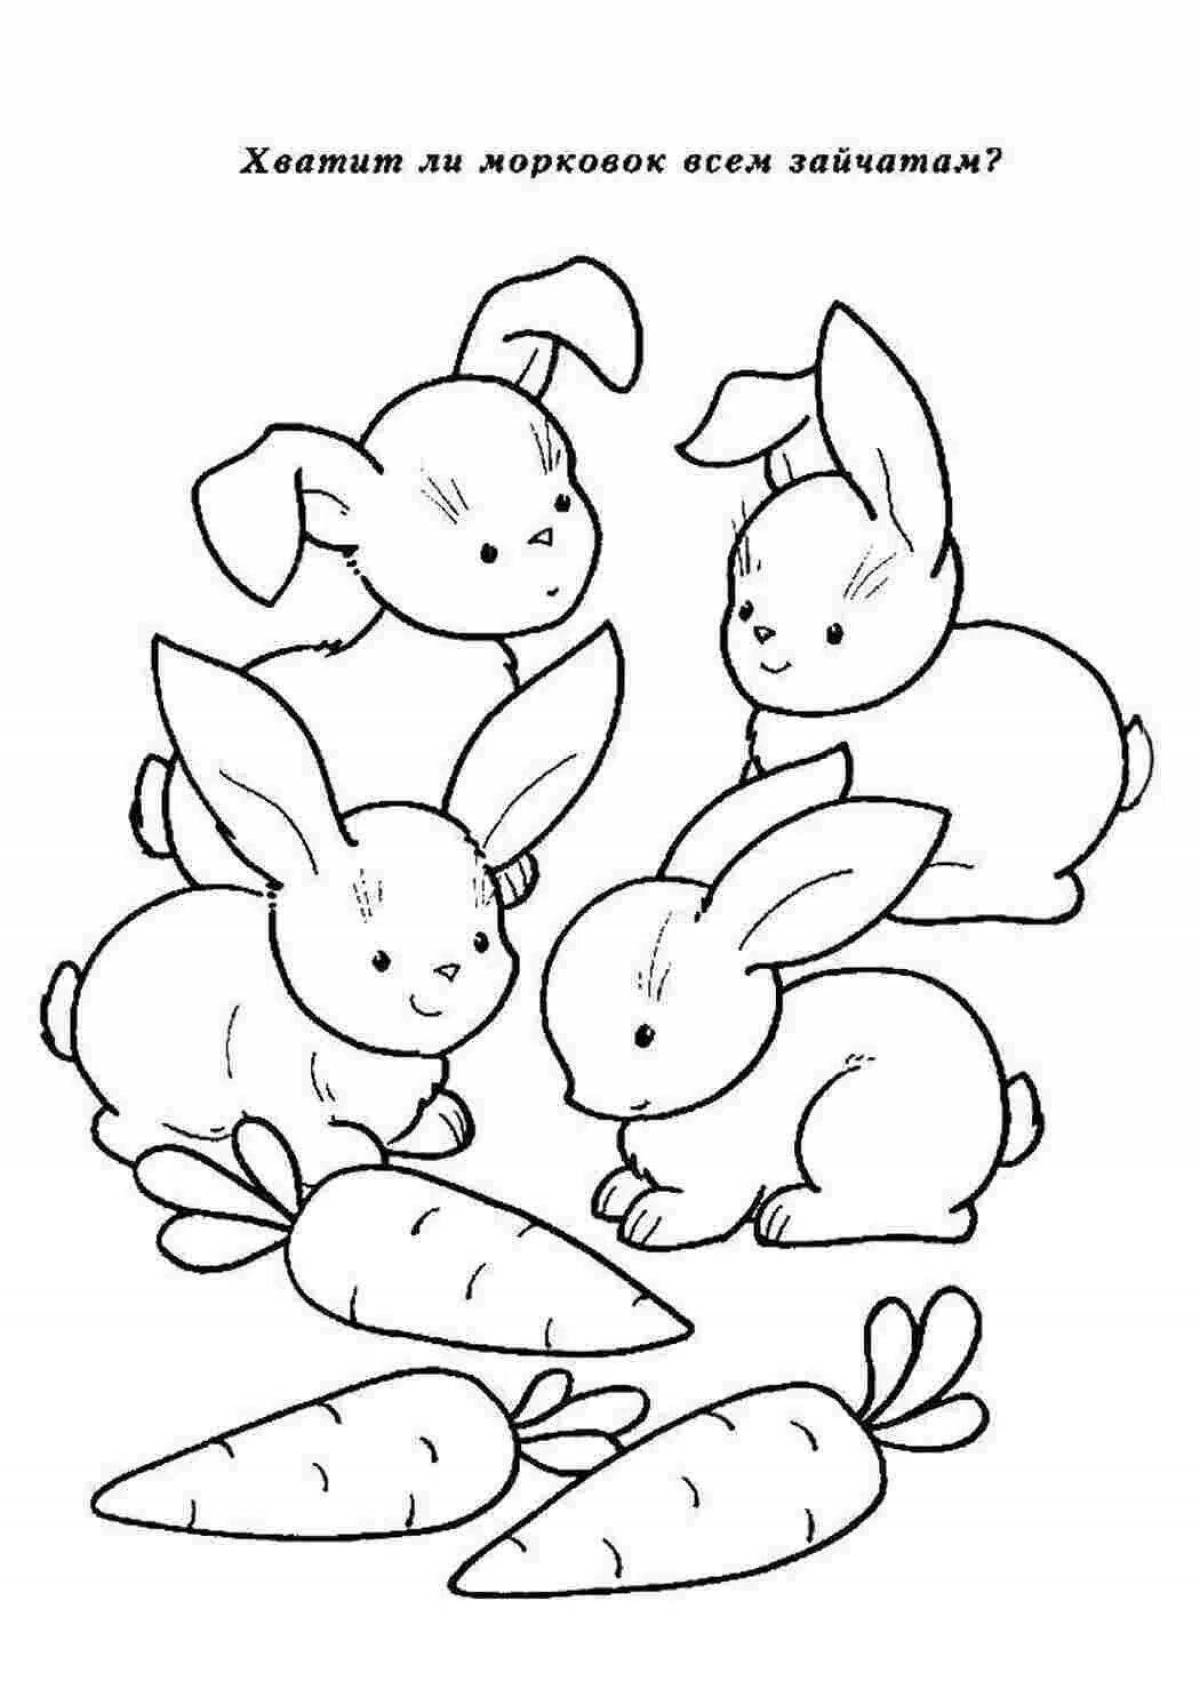 Living carrot coloring for bunny 2 junior group